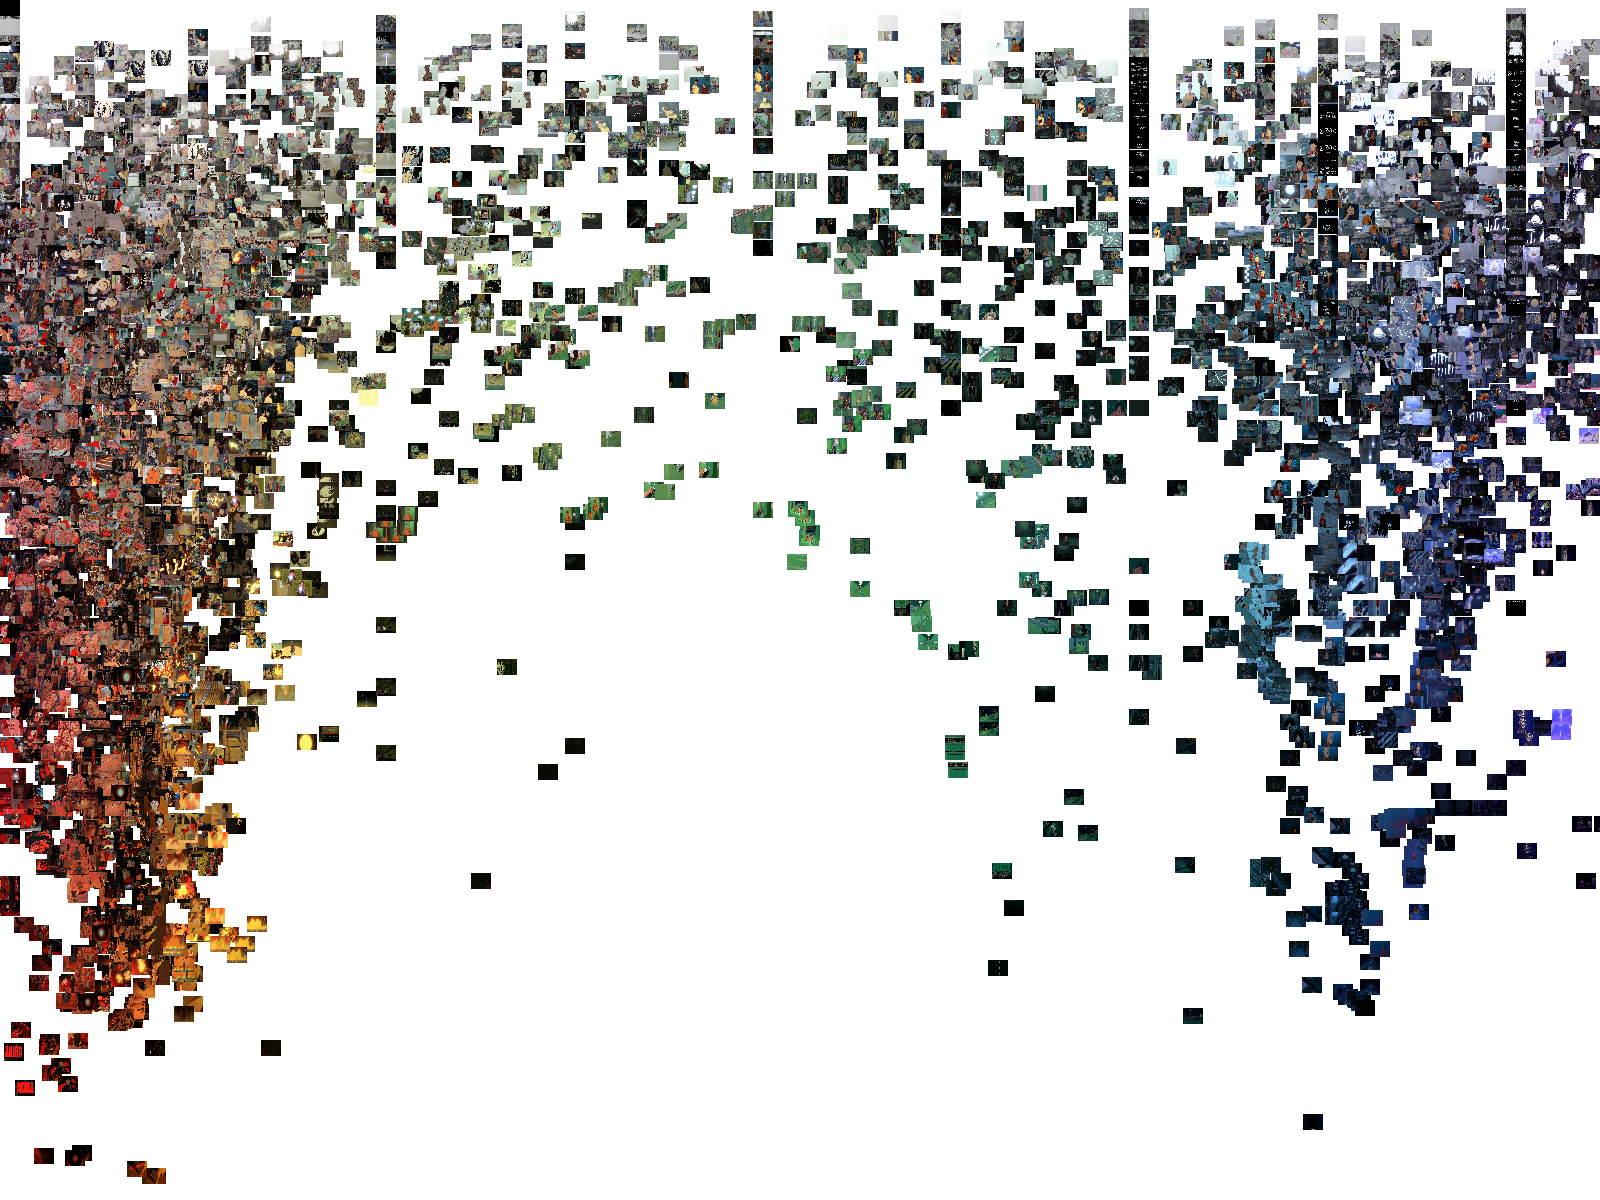 7467 frames of Akira, plotted by their average hue and saturation.